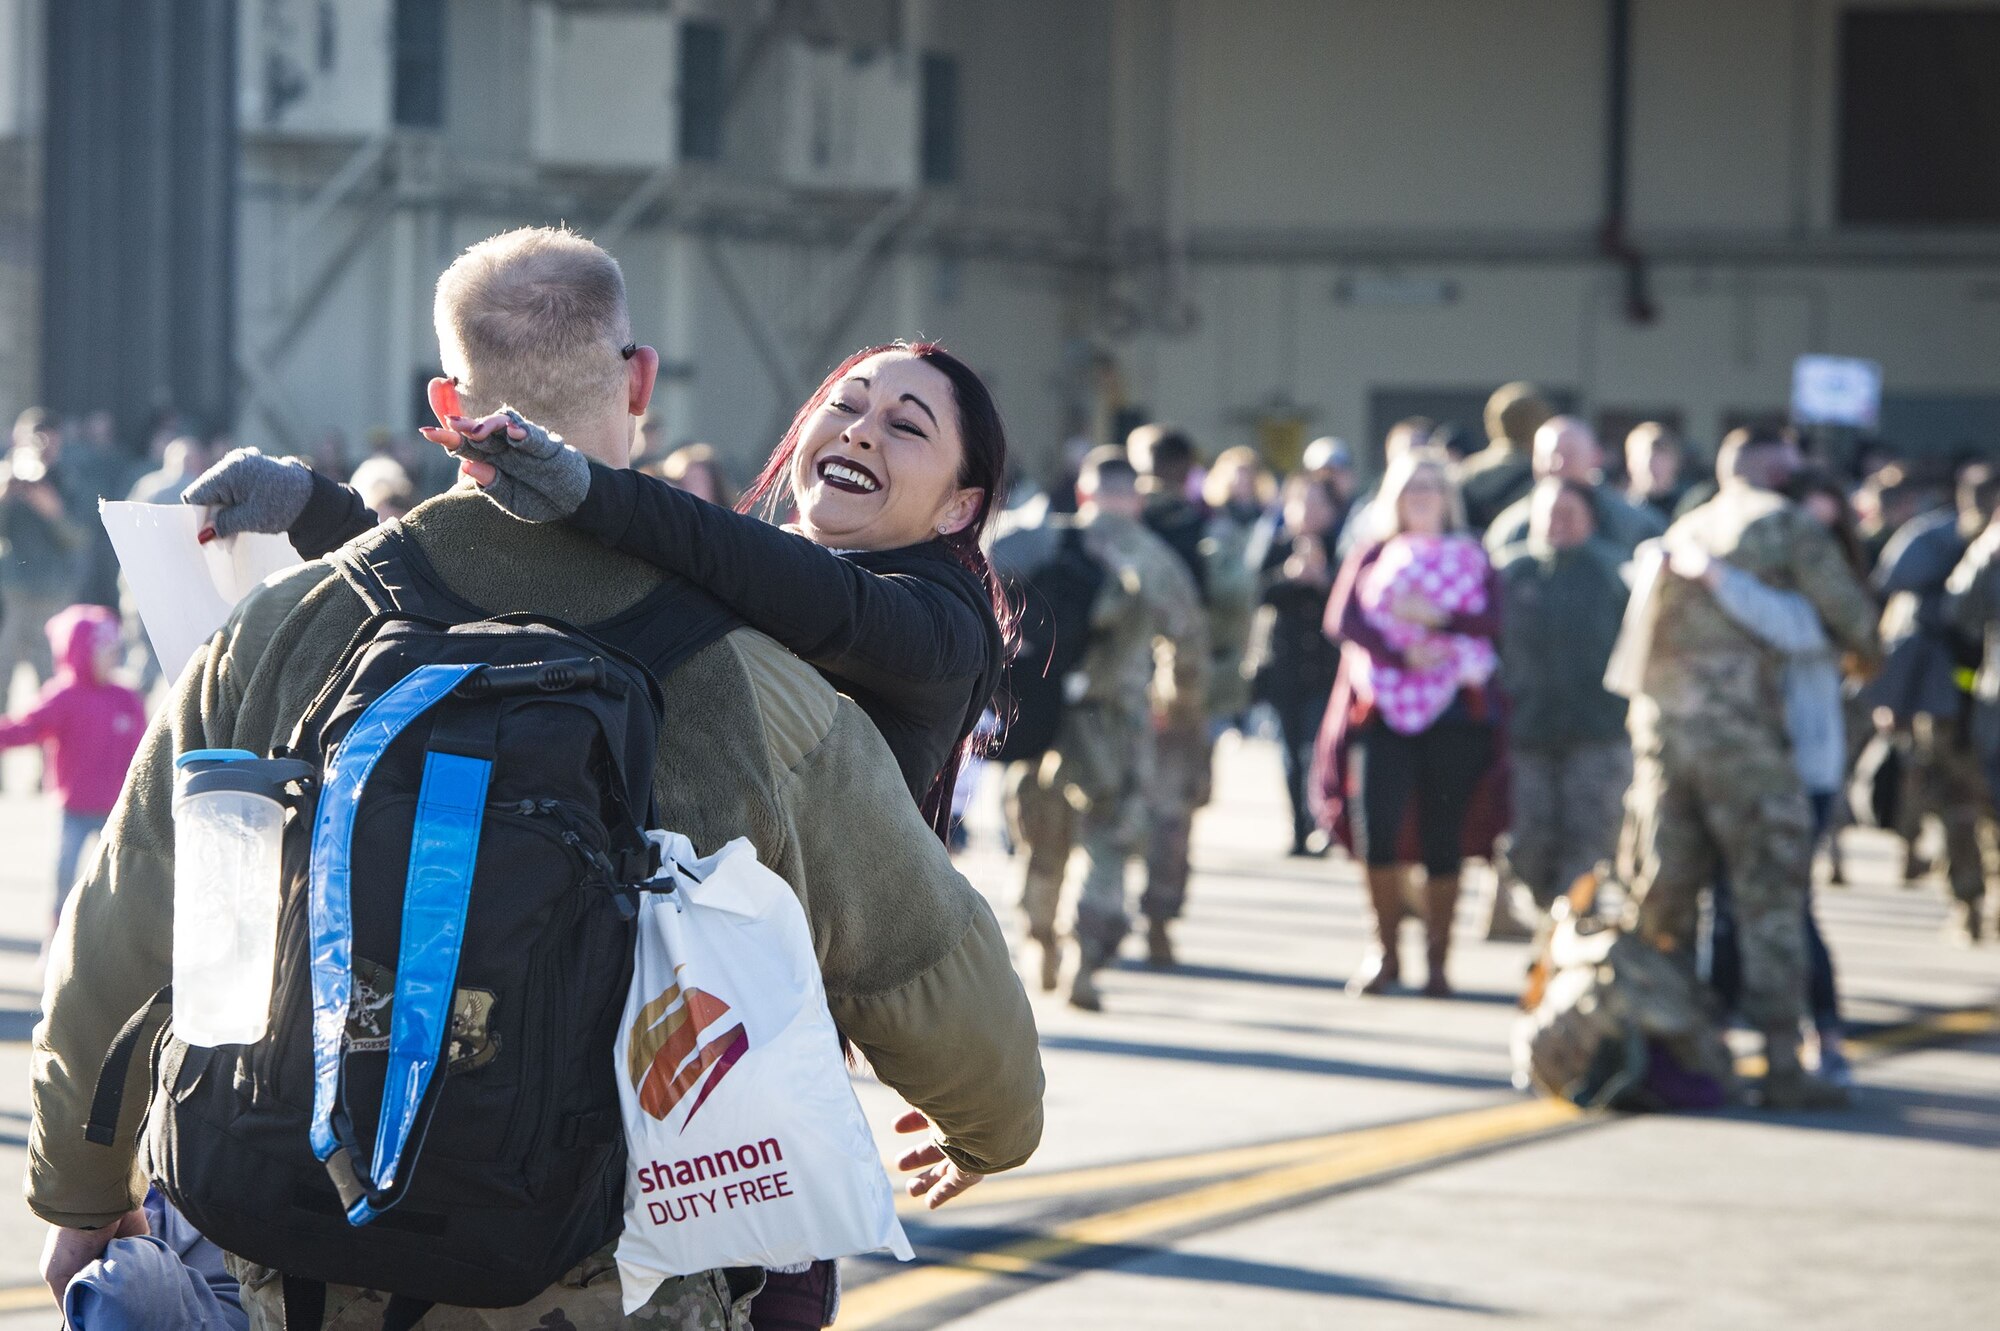 Rachel Hinton, embraces her husband, Staff Sgt. Eric Hinton, 723d Aircraft Maintenance Squadron, during a redeployment ceremony, Jan. 19, 2018, at Moody Air Force Base, Ga. While deployed in support of Operation Inherent Resolve, the 74th FS earned 65 Air Medals, five single-event Air Medals, four Combat Action Medals, and received four Distinguished Flying Cross nominations. (U.S. Air Force photo by Staff Sgt. Ceaira Young)